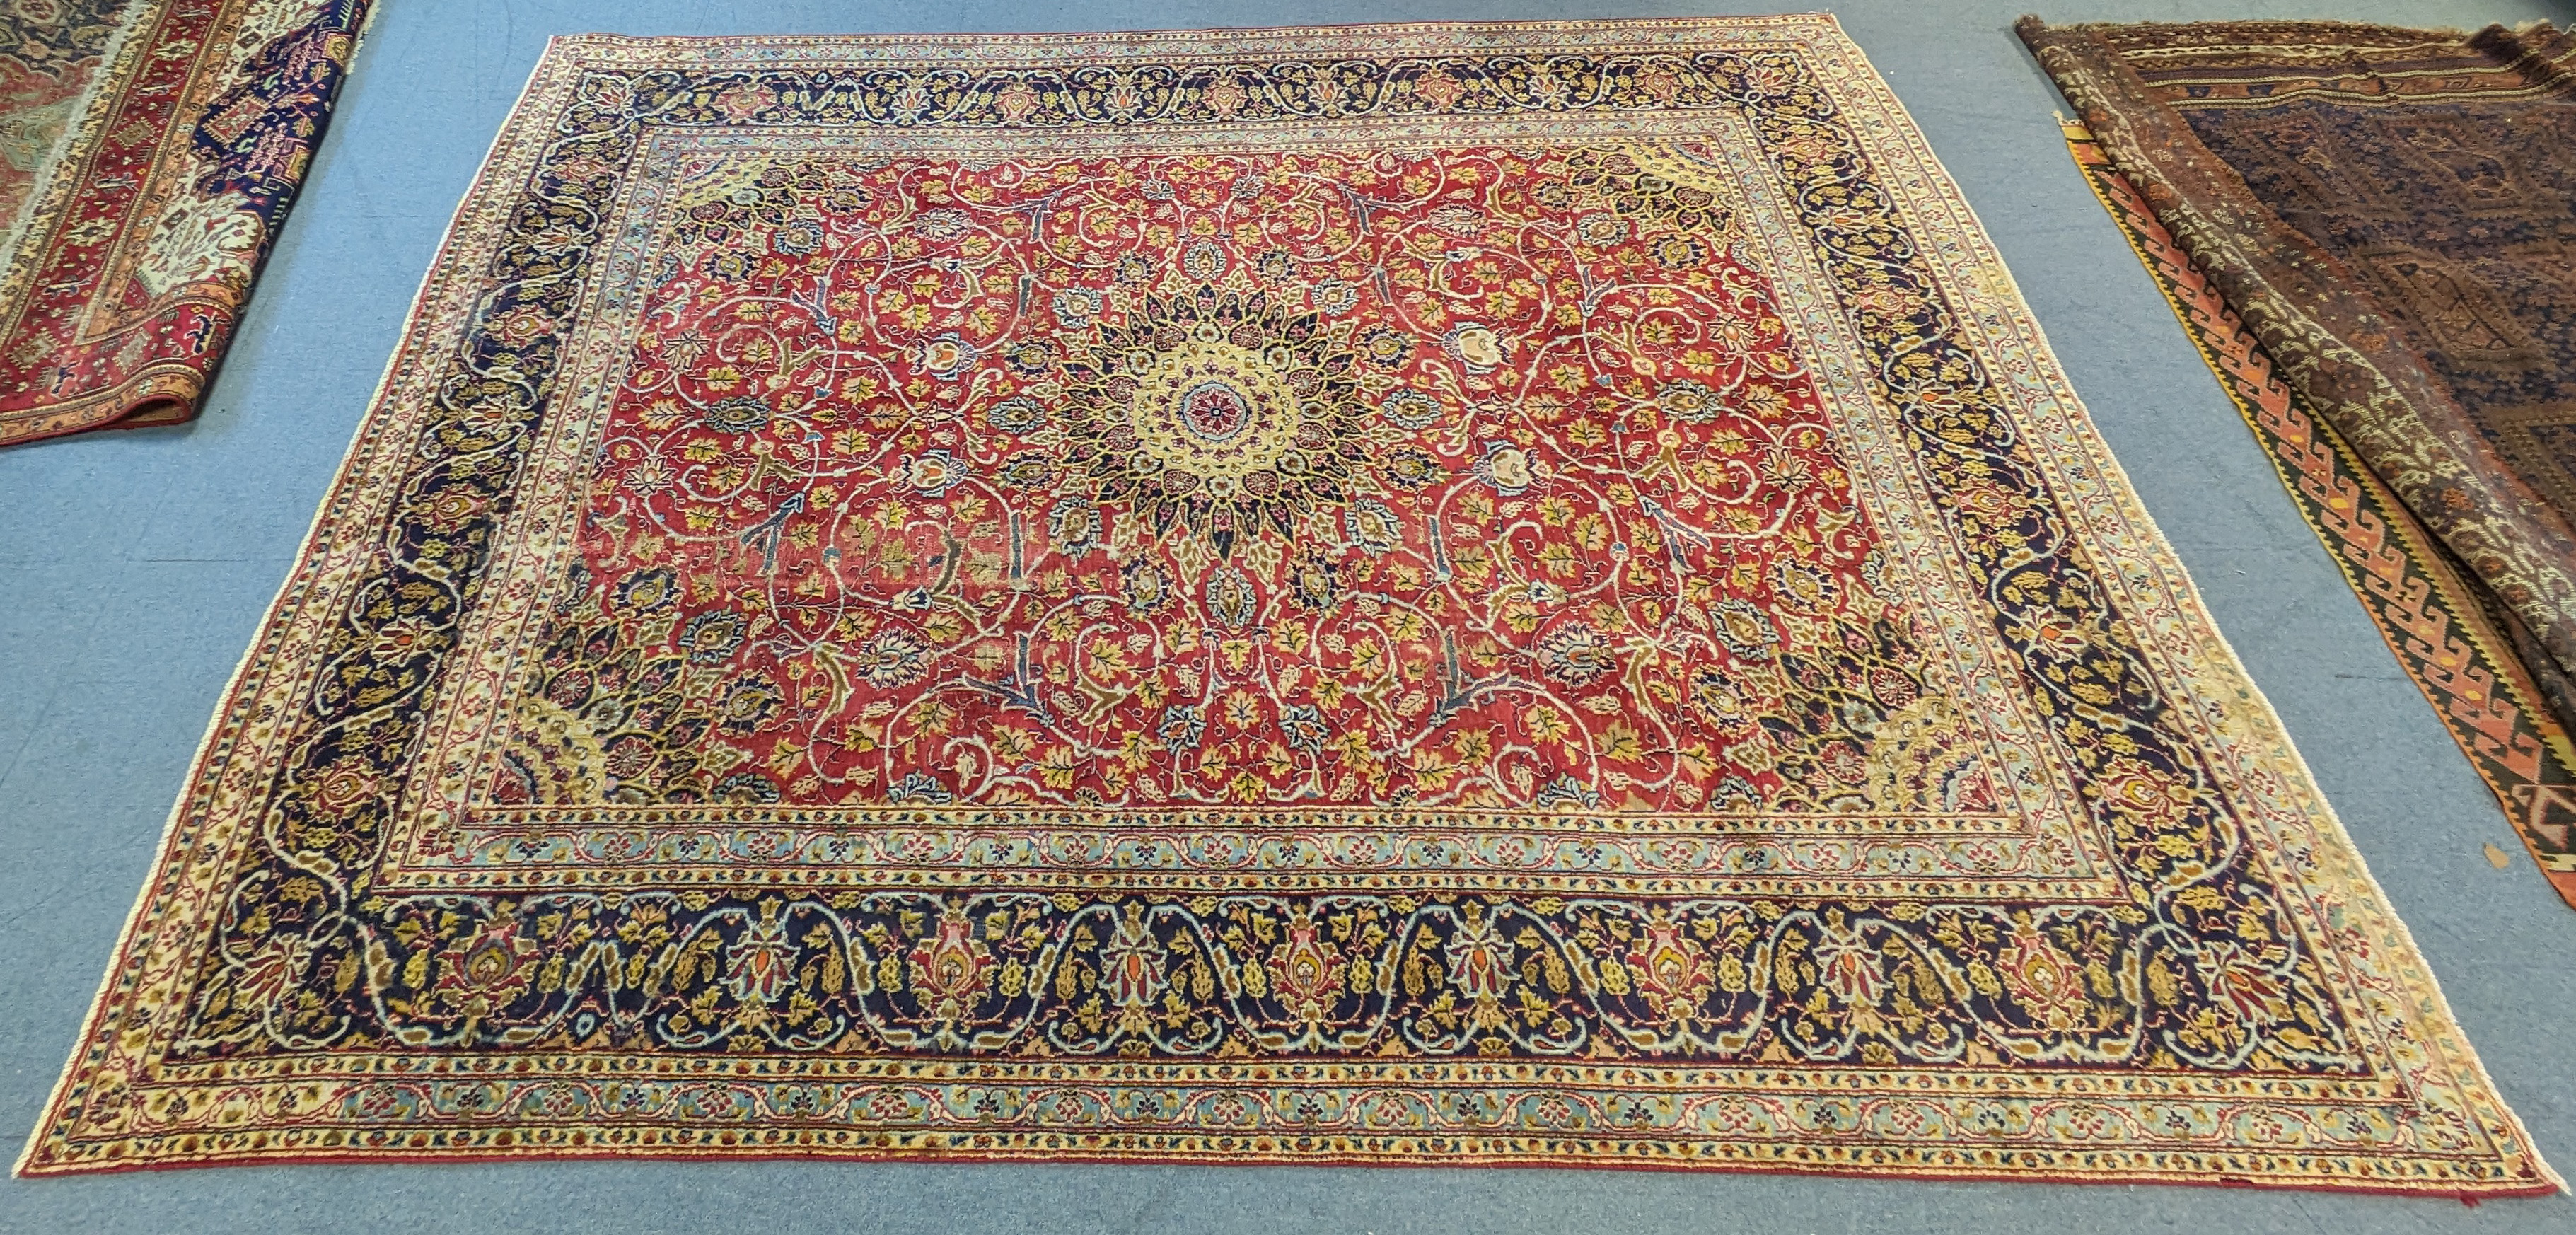 A Persian carpet of crimson ground featuring a central medallion, surrounded by floral motifs,